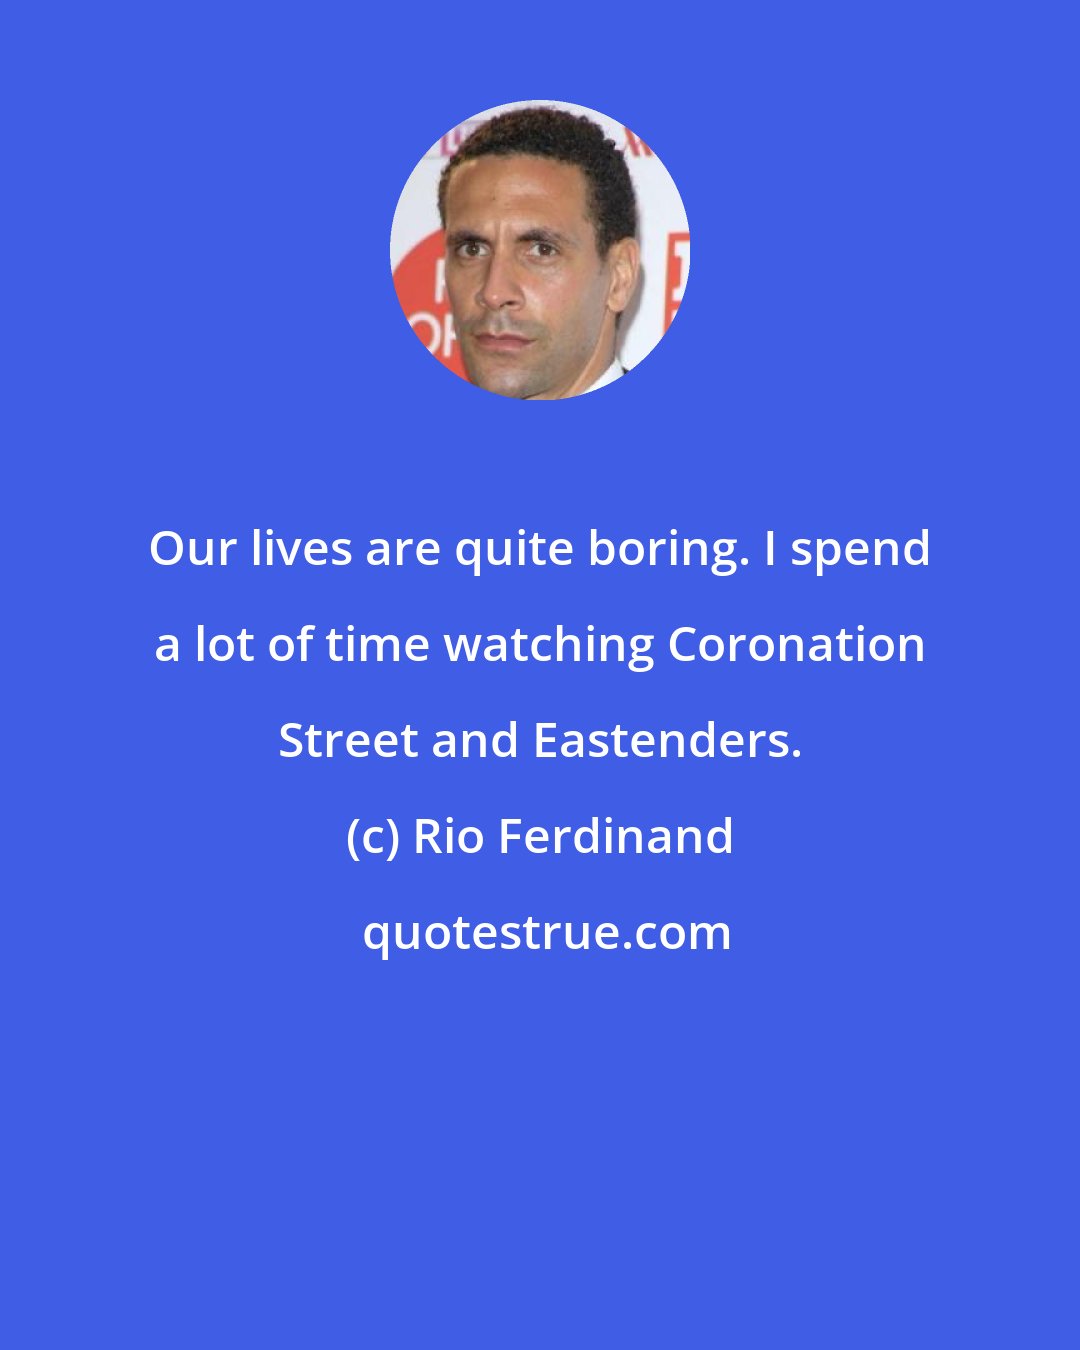 Rio Ferdinand: Our lives are quite boring. I spend a lot of time watching Coronation Street and Eastenders.